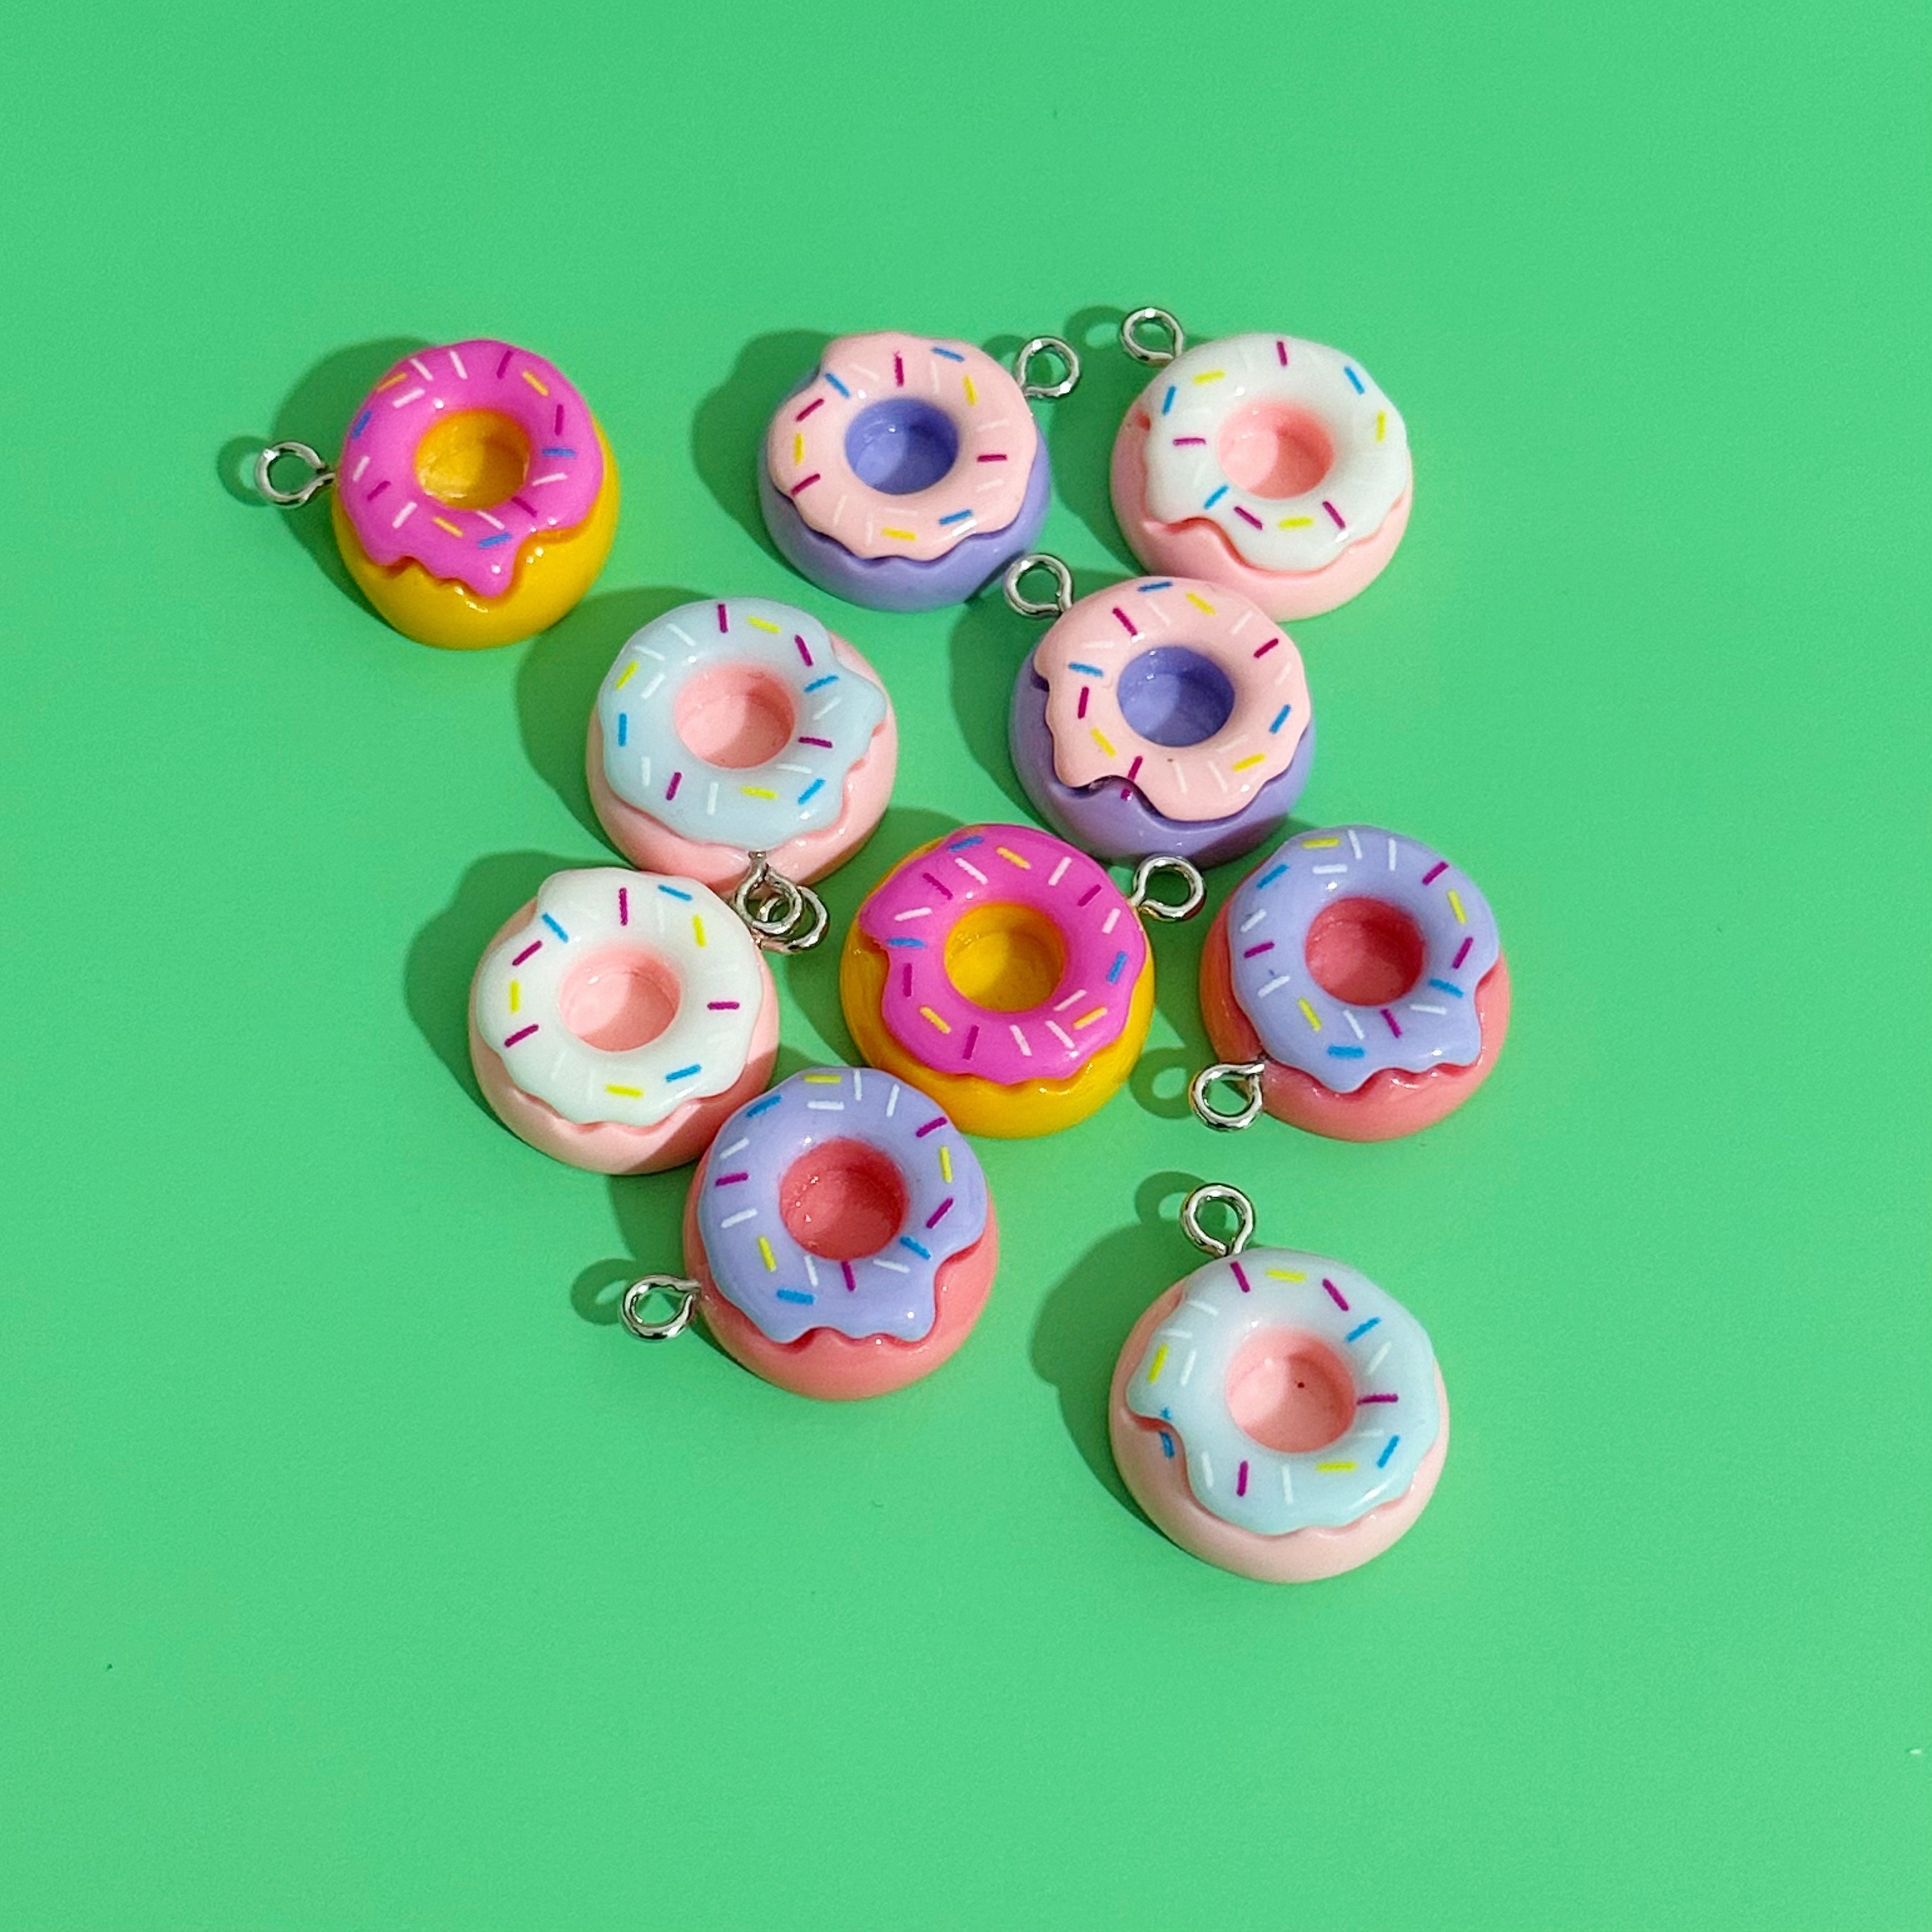 

10pcs Random Mixed Color Glossy 3d Donut Handmade Jewelry Pendant Drop Earrings Chain Ornament Earrings Necklace Bag Pendant Keychain Resin Accessories